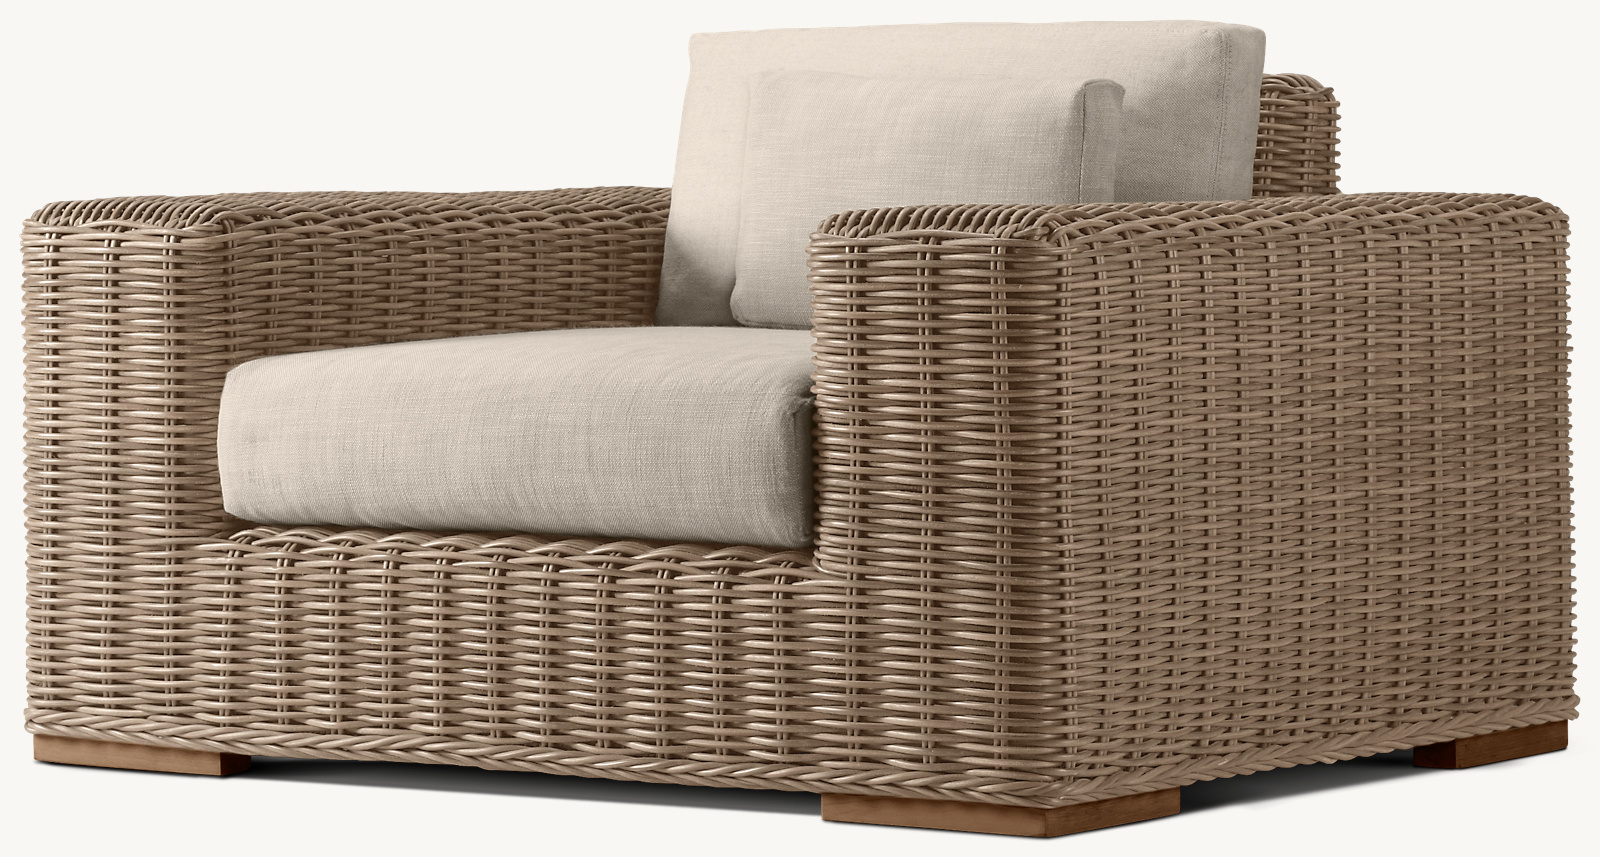 Cushion (sold separately) shown in Sand Perennials&#174; Textured Linen Weave.